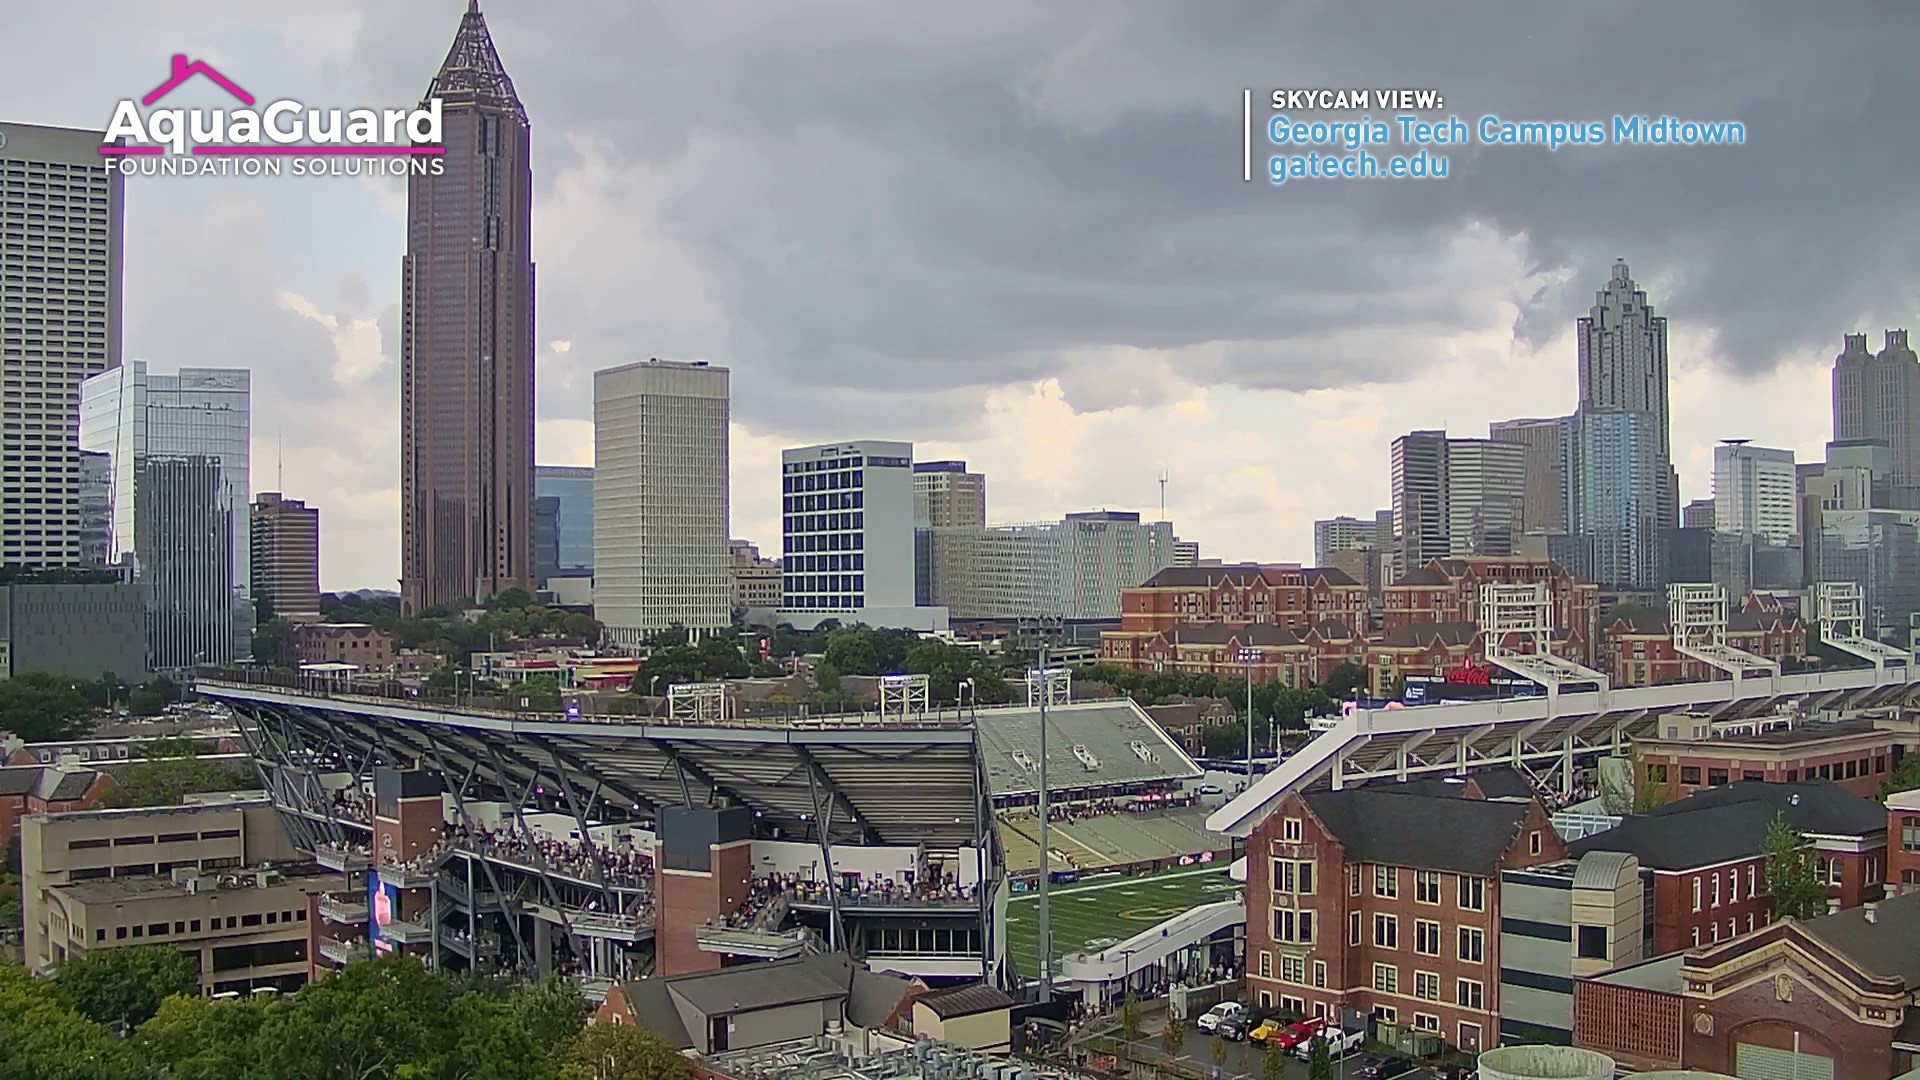 Fans were told to see shelter as storms rolled across Atlanta.